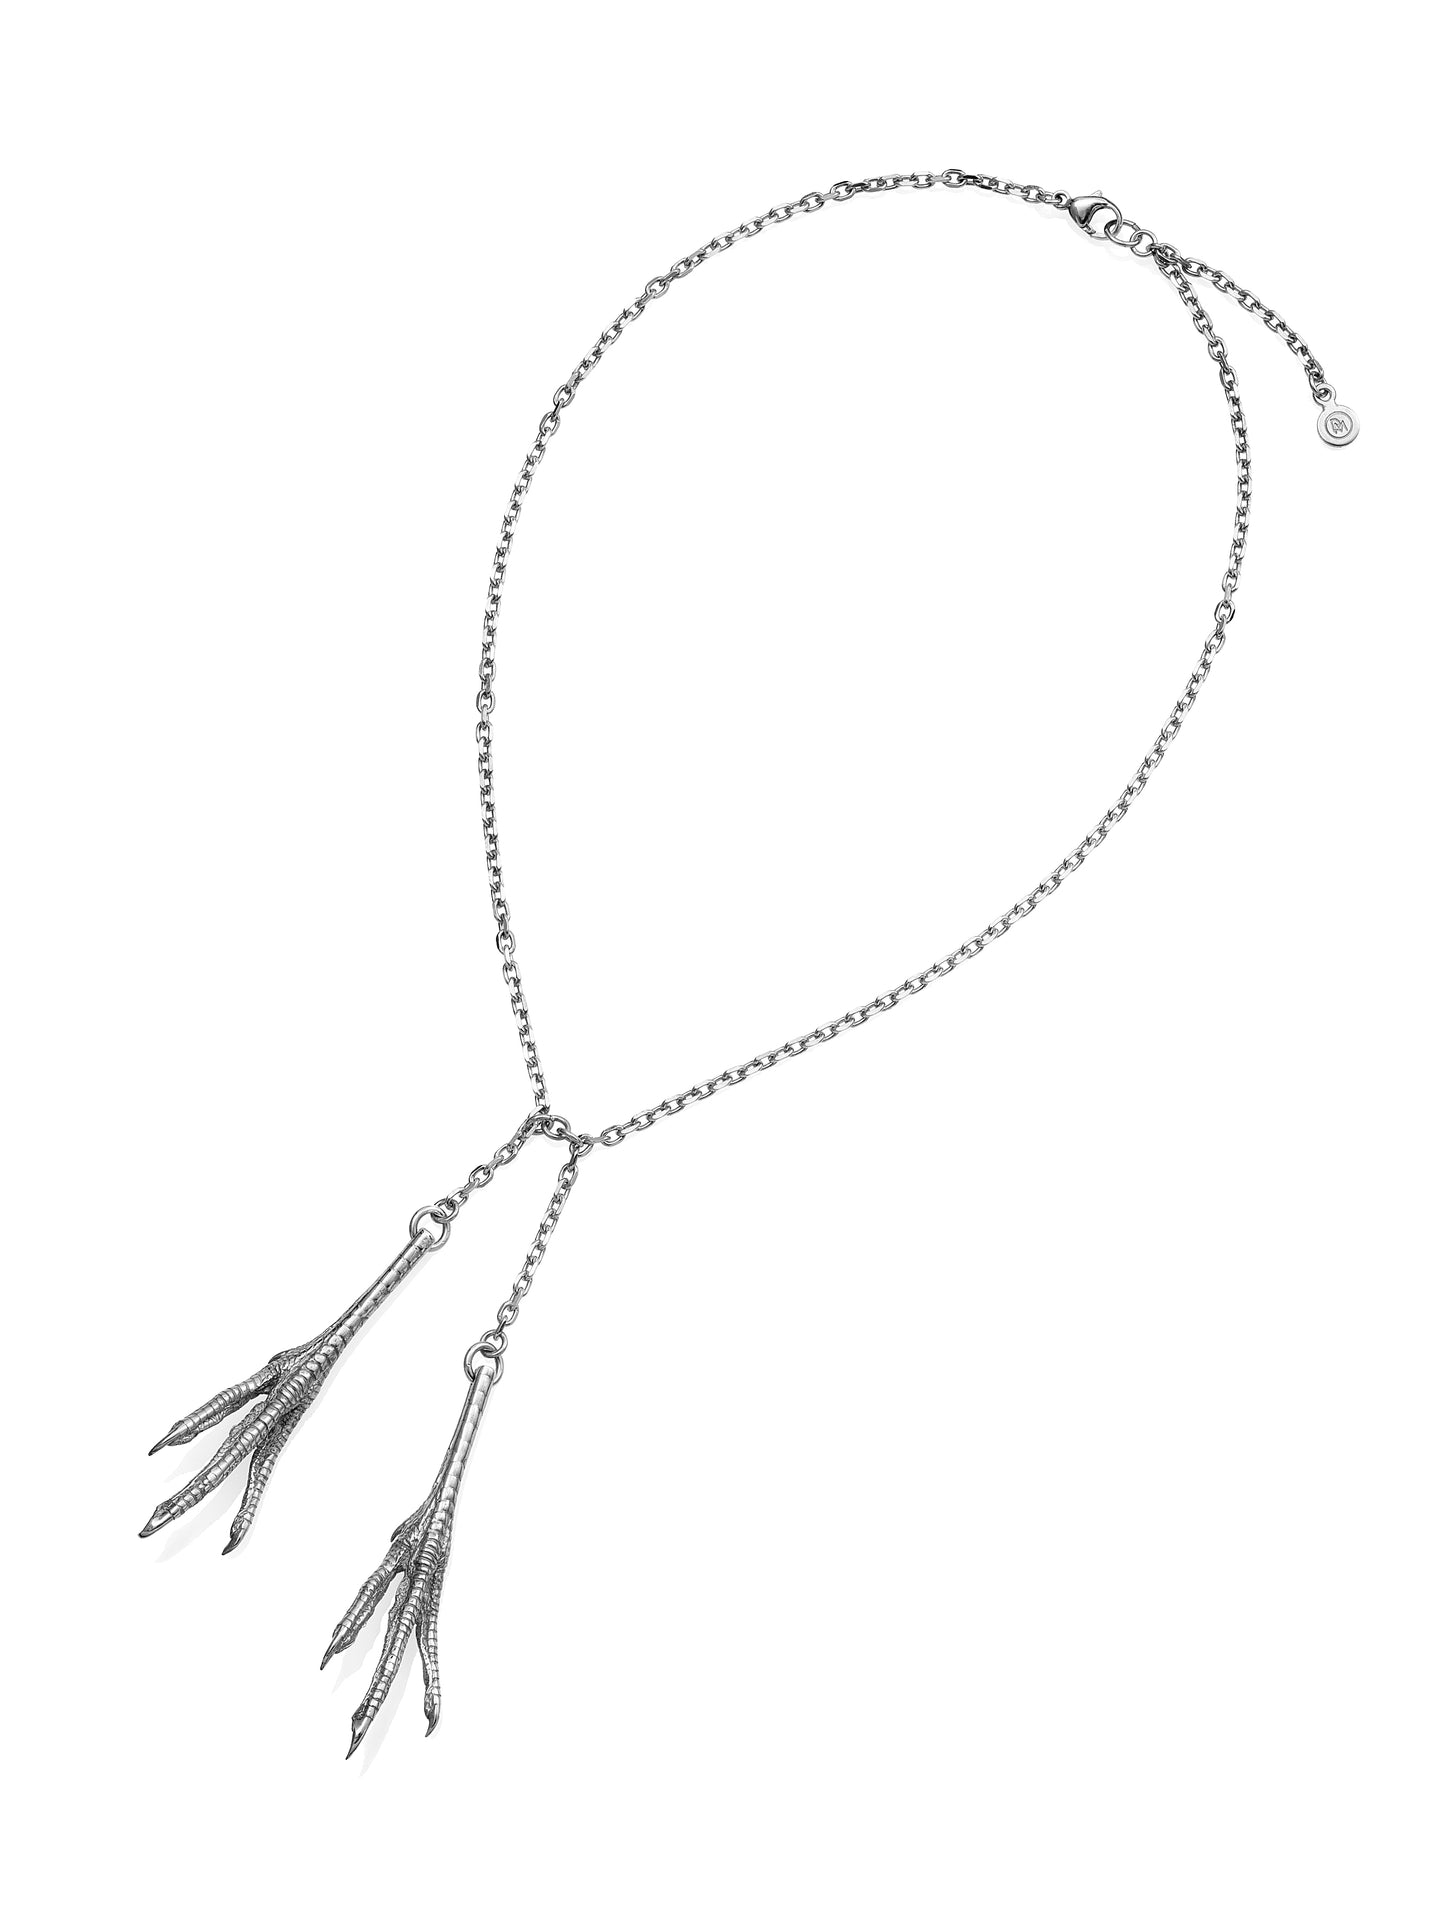 Iconic Chicken Feet Necklace with a single pendant, 925 silver